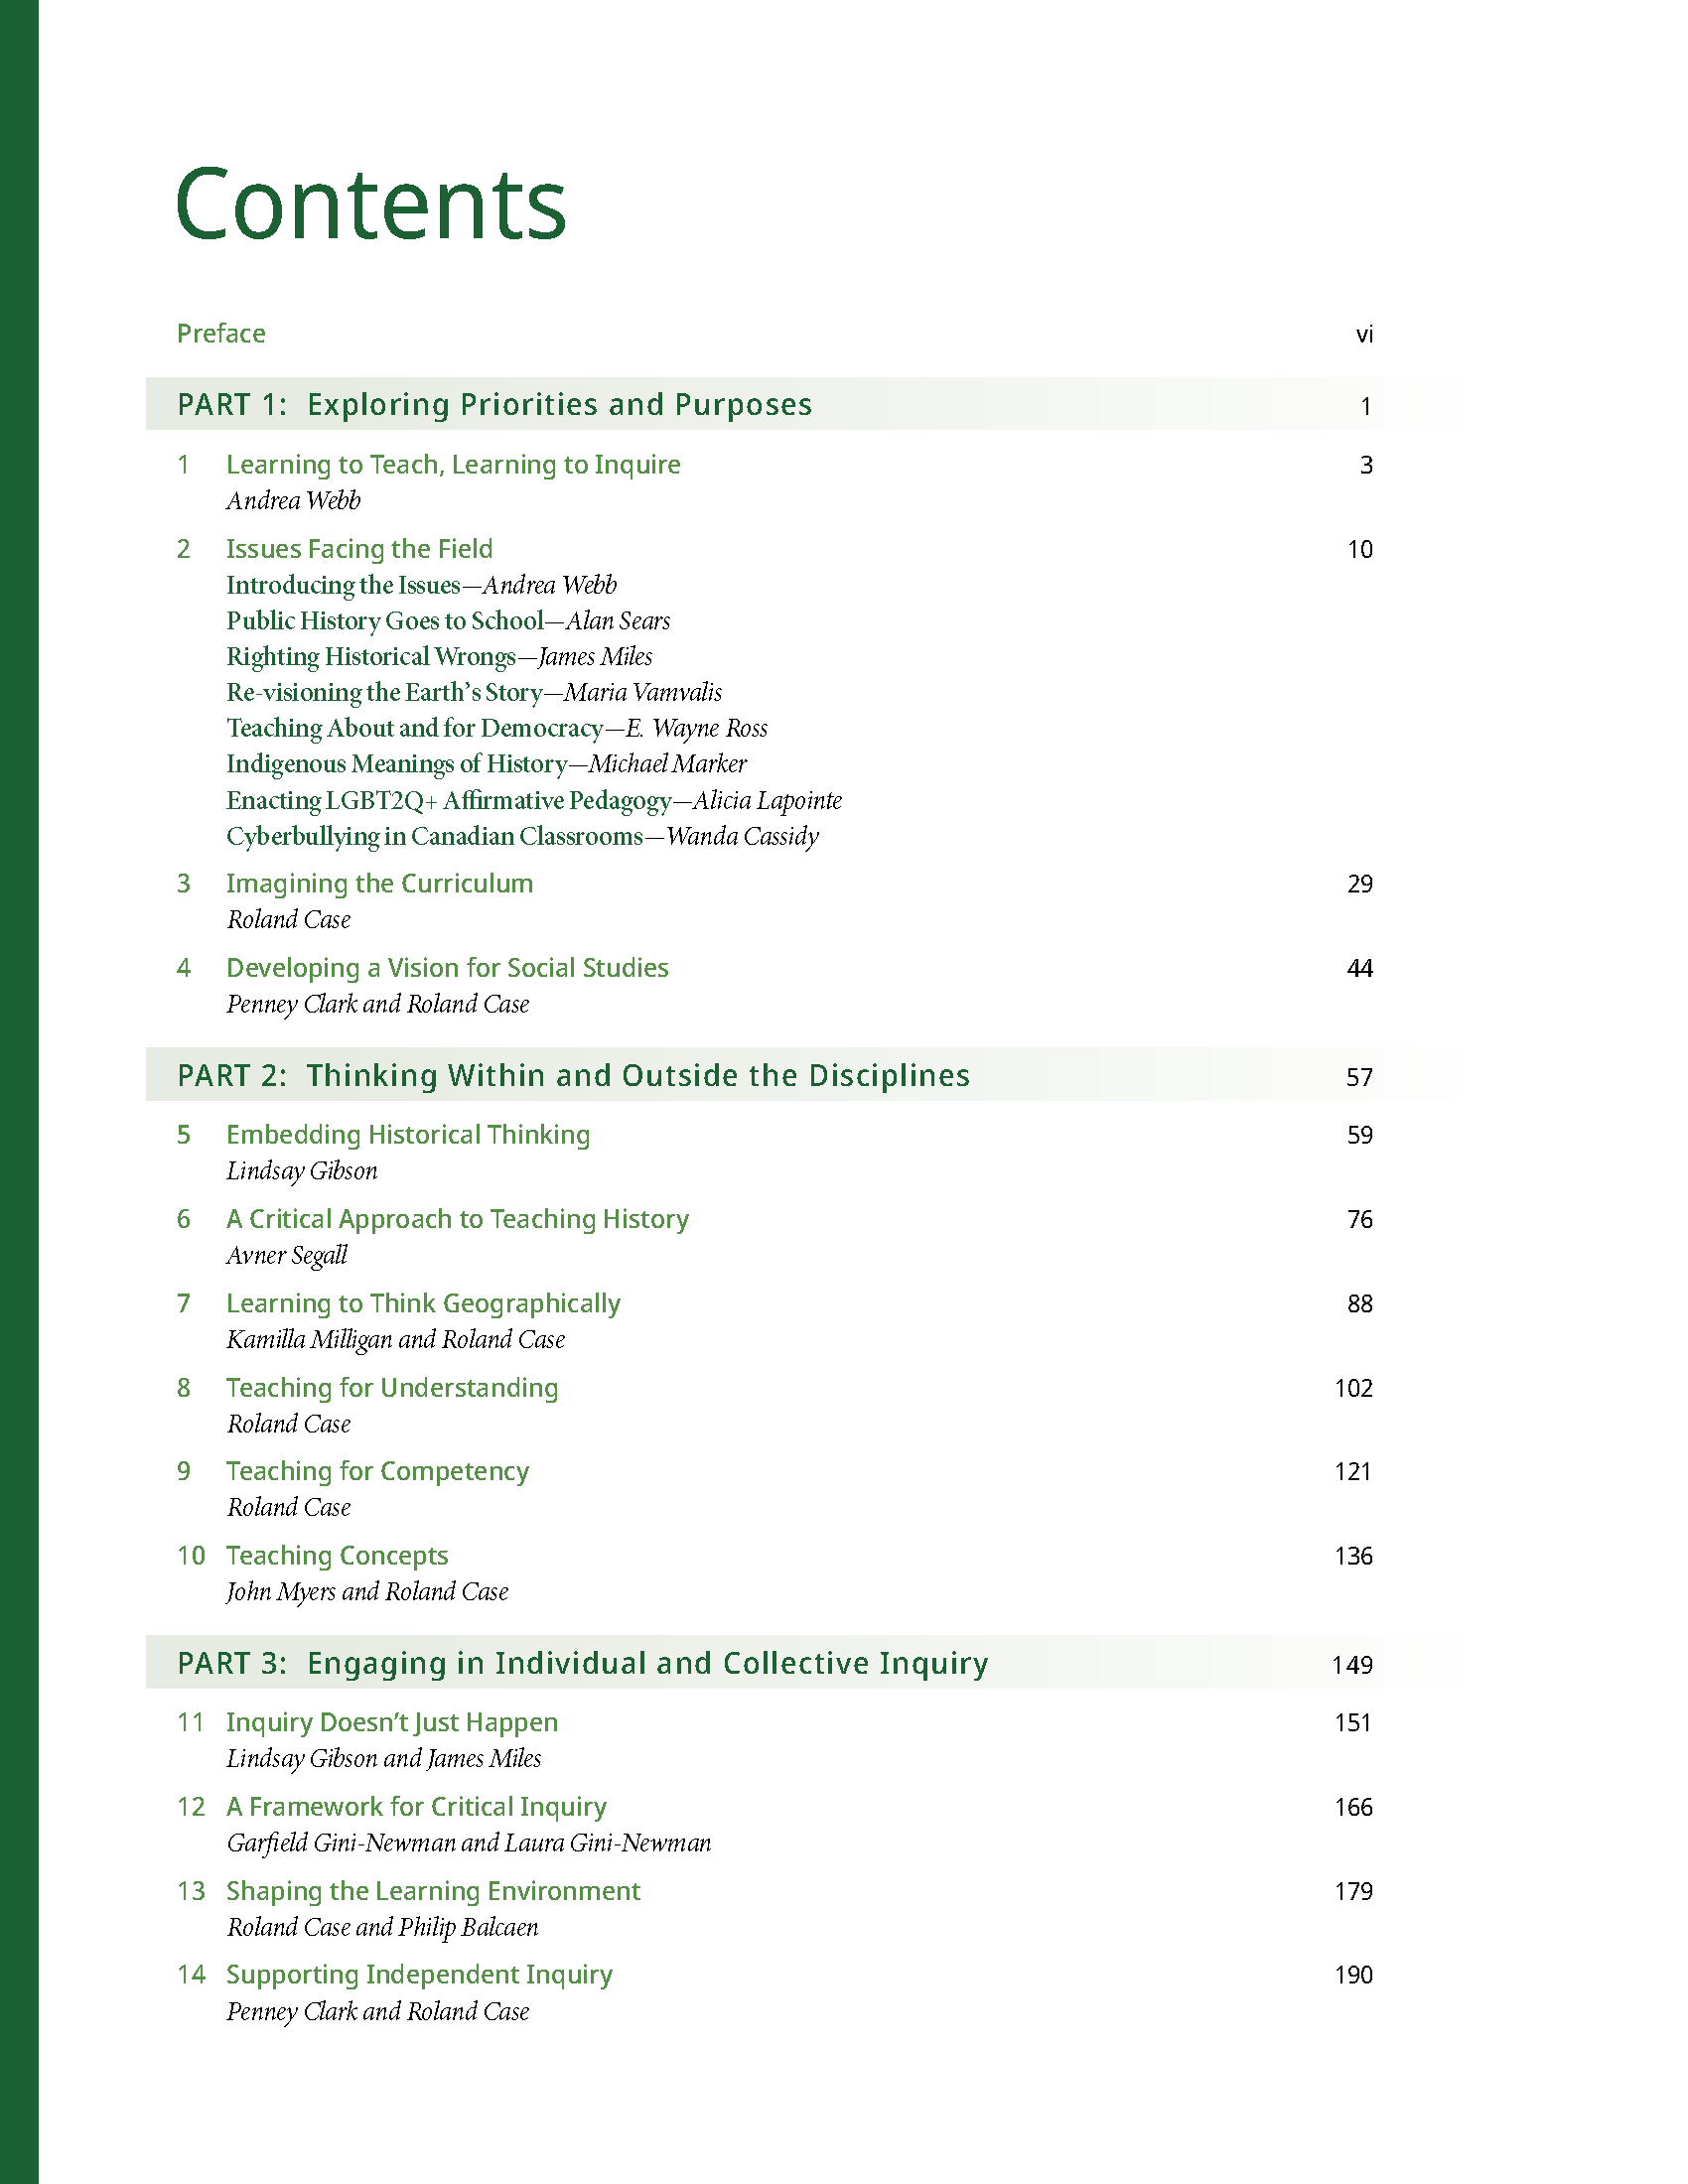 Learning to Inquire in History, Geography, and Social Studies: An Anthology for Secondary Teachers - Table of Contents